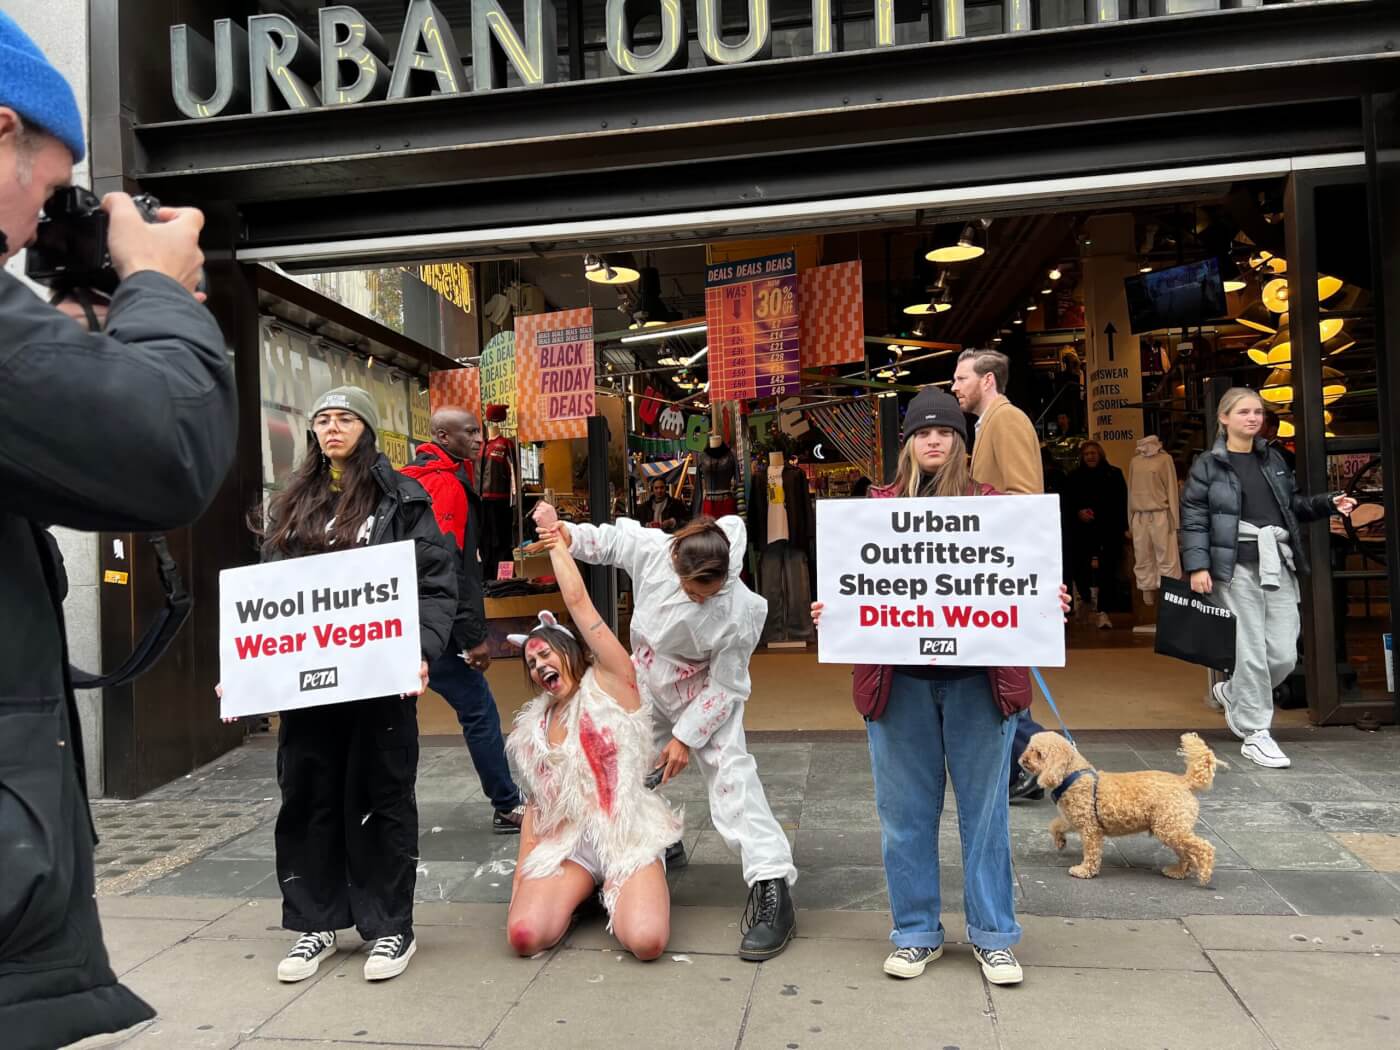 Why PETA 'Sheep' Was 'Sheared' Near Urban Outfitters Store